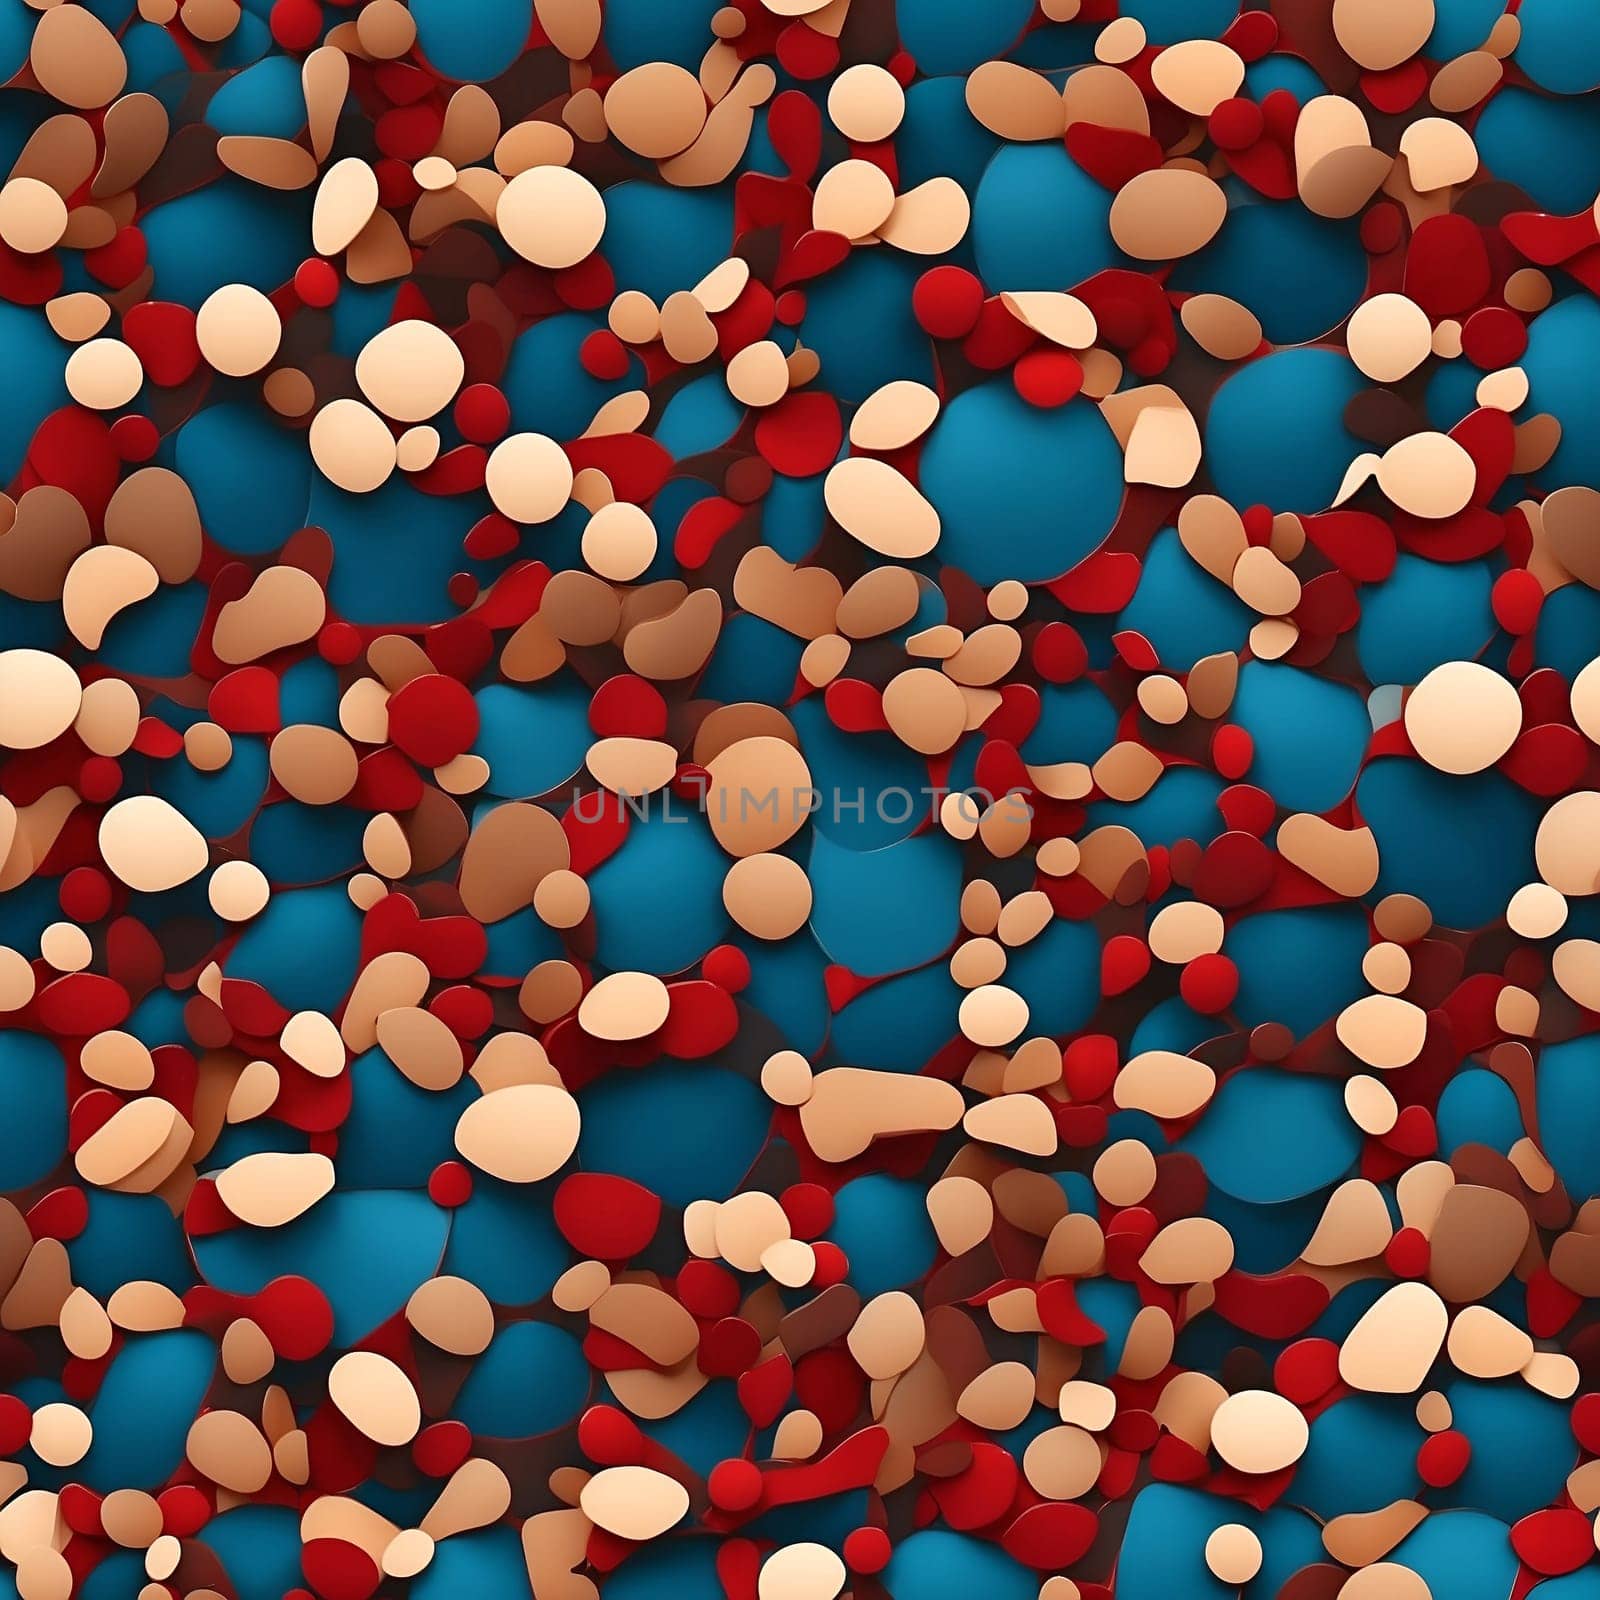 A seamlessly repeating pattern featuring a multitude of red, white, and blue circles.